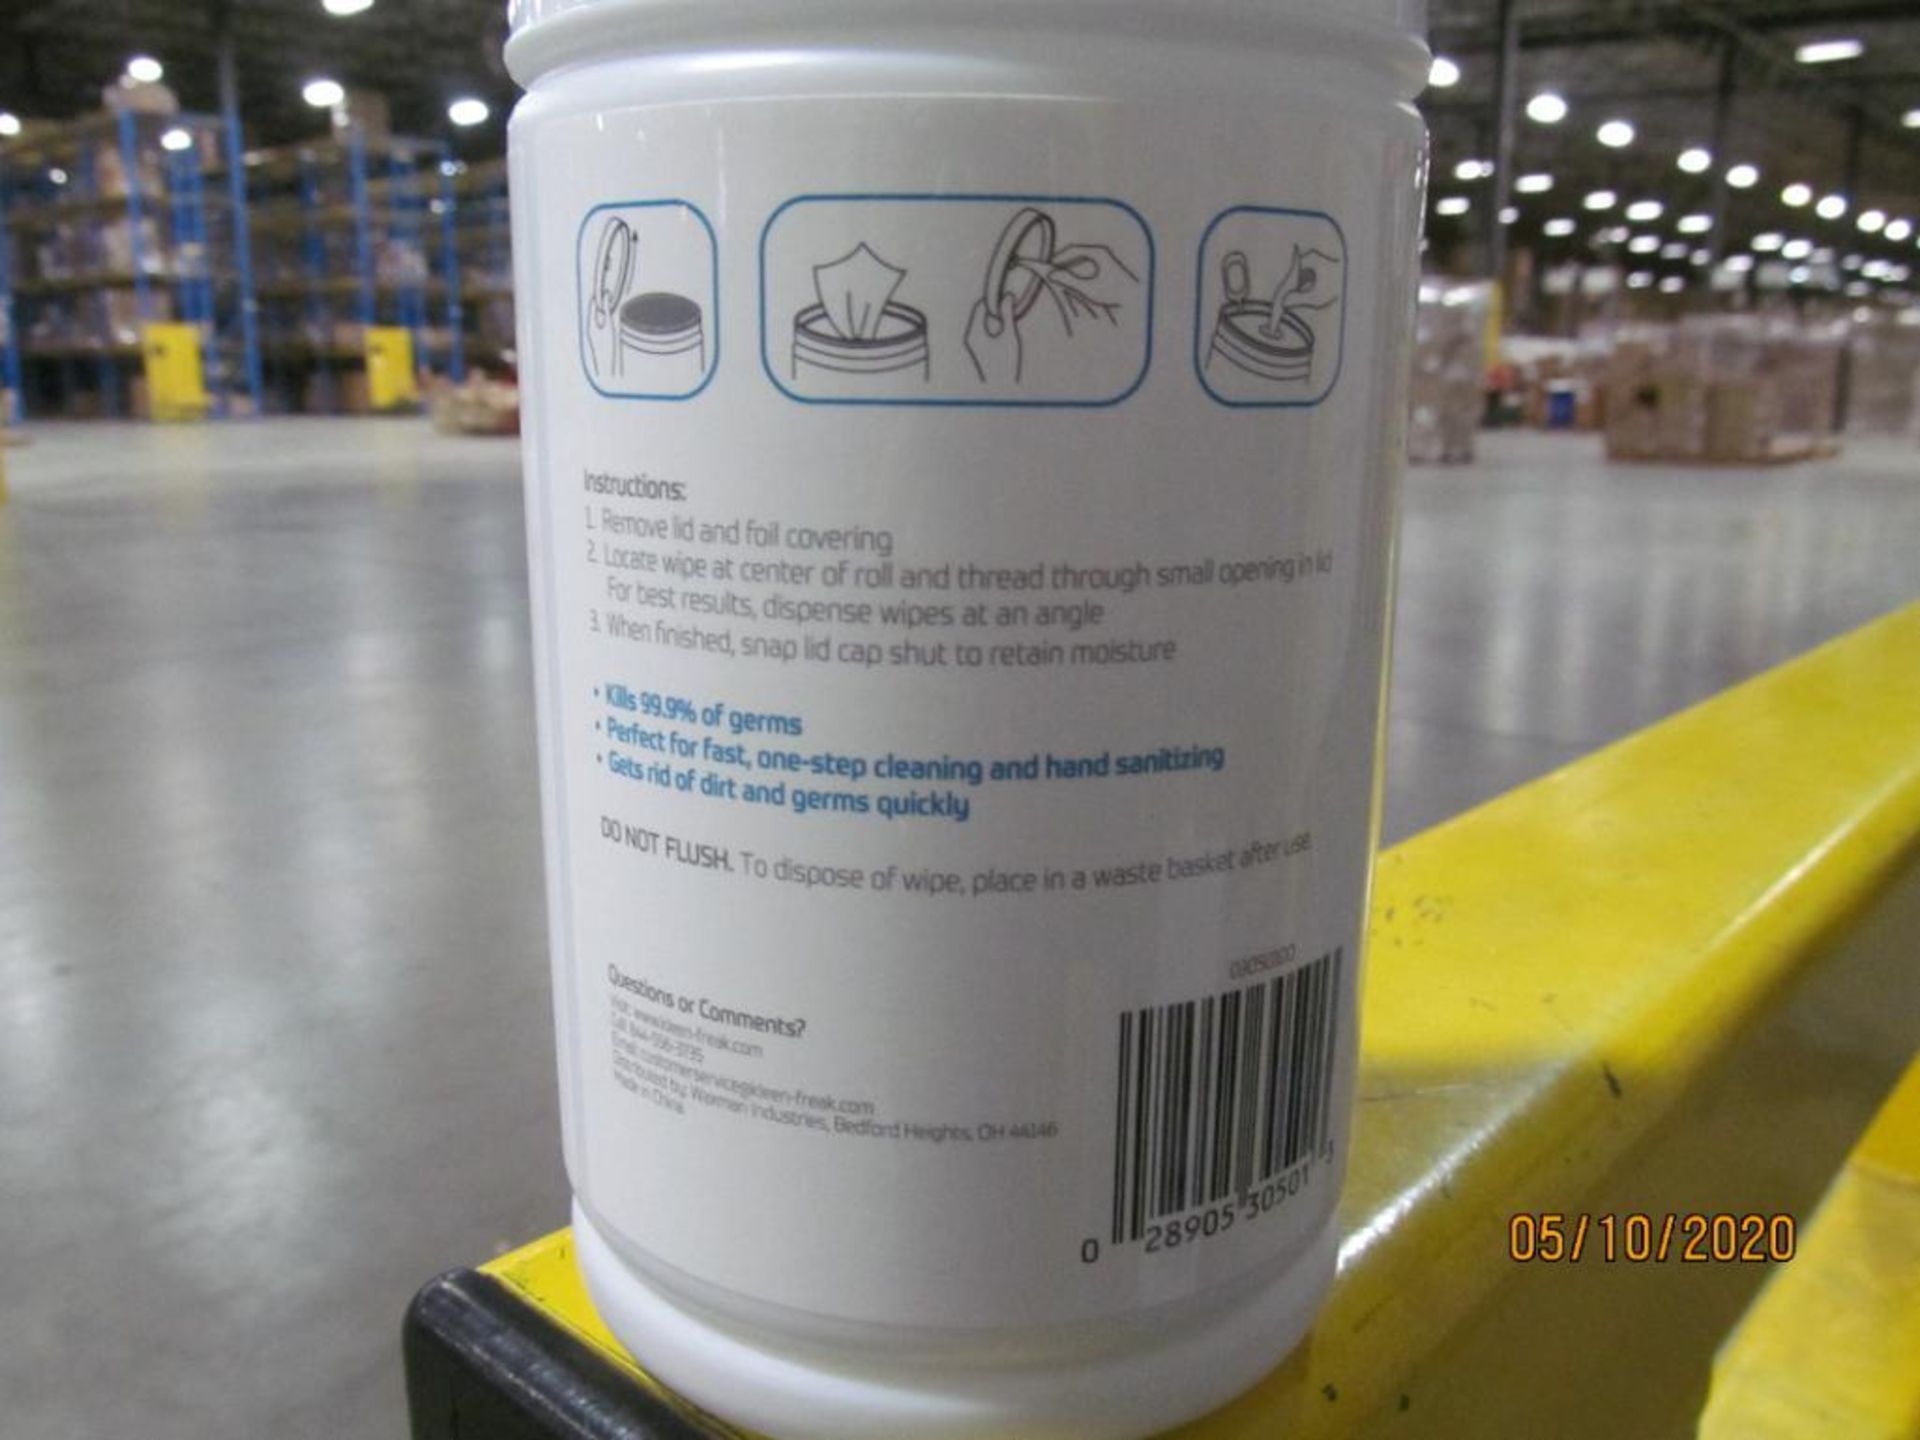 Lot of Waxman Kleen Freak Sanitizing Wipes consisting of 134,784 packages on 208 pallets. Each packa - Image 2 of 11